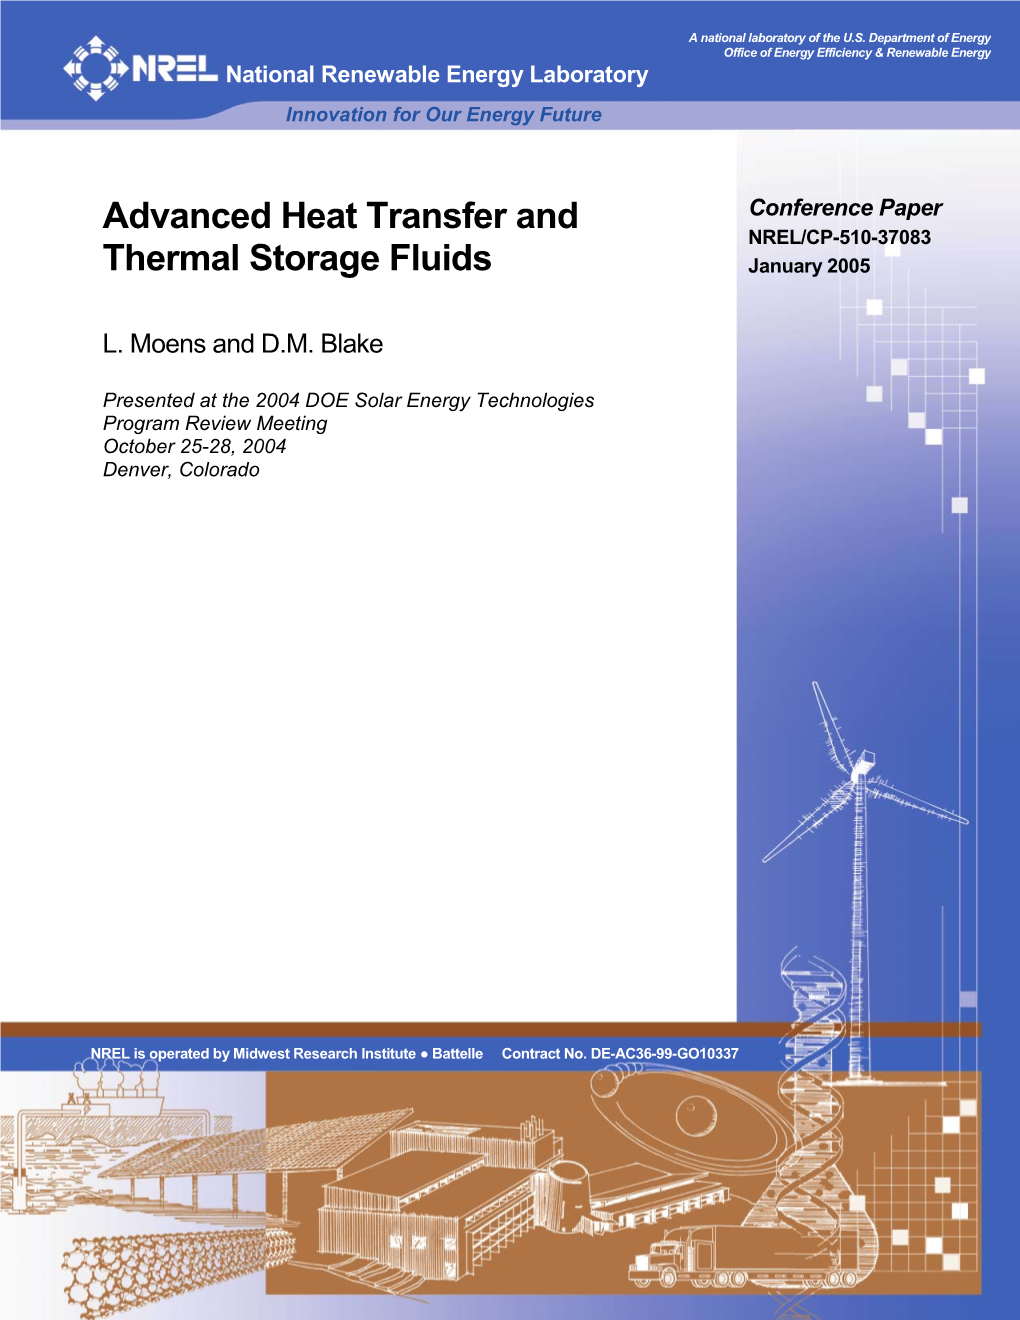 Advanced Heat Transfer and Thermal Storage Fluids